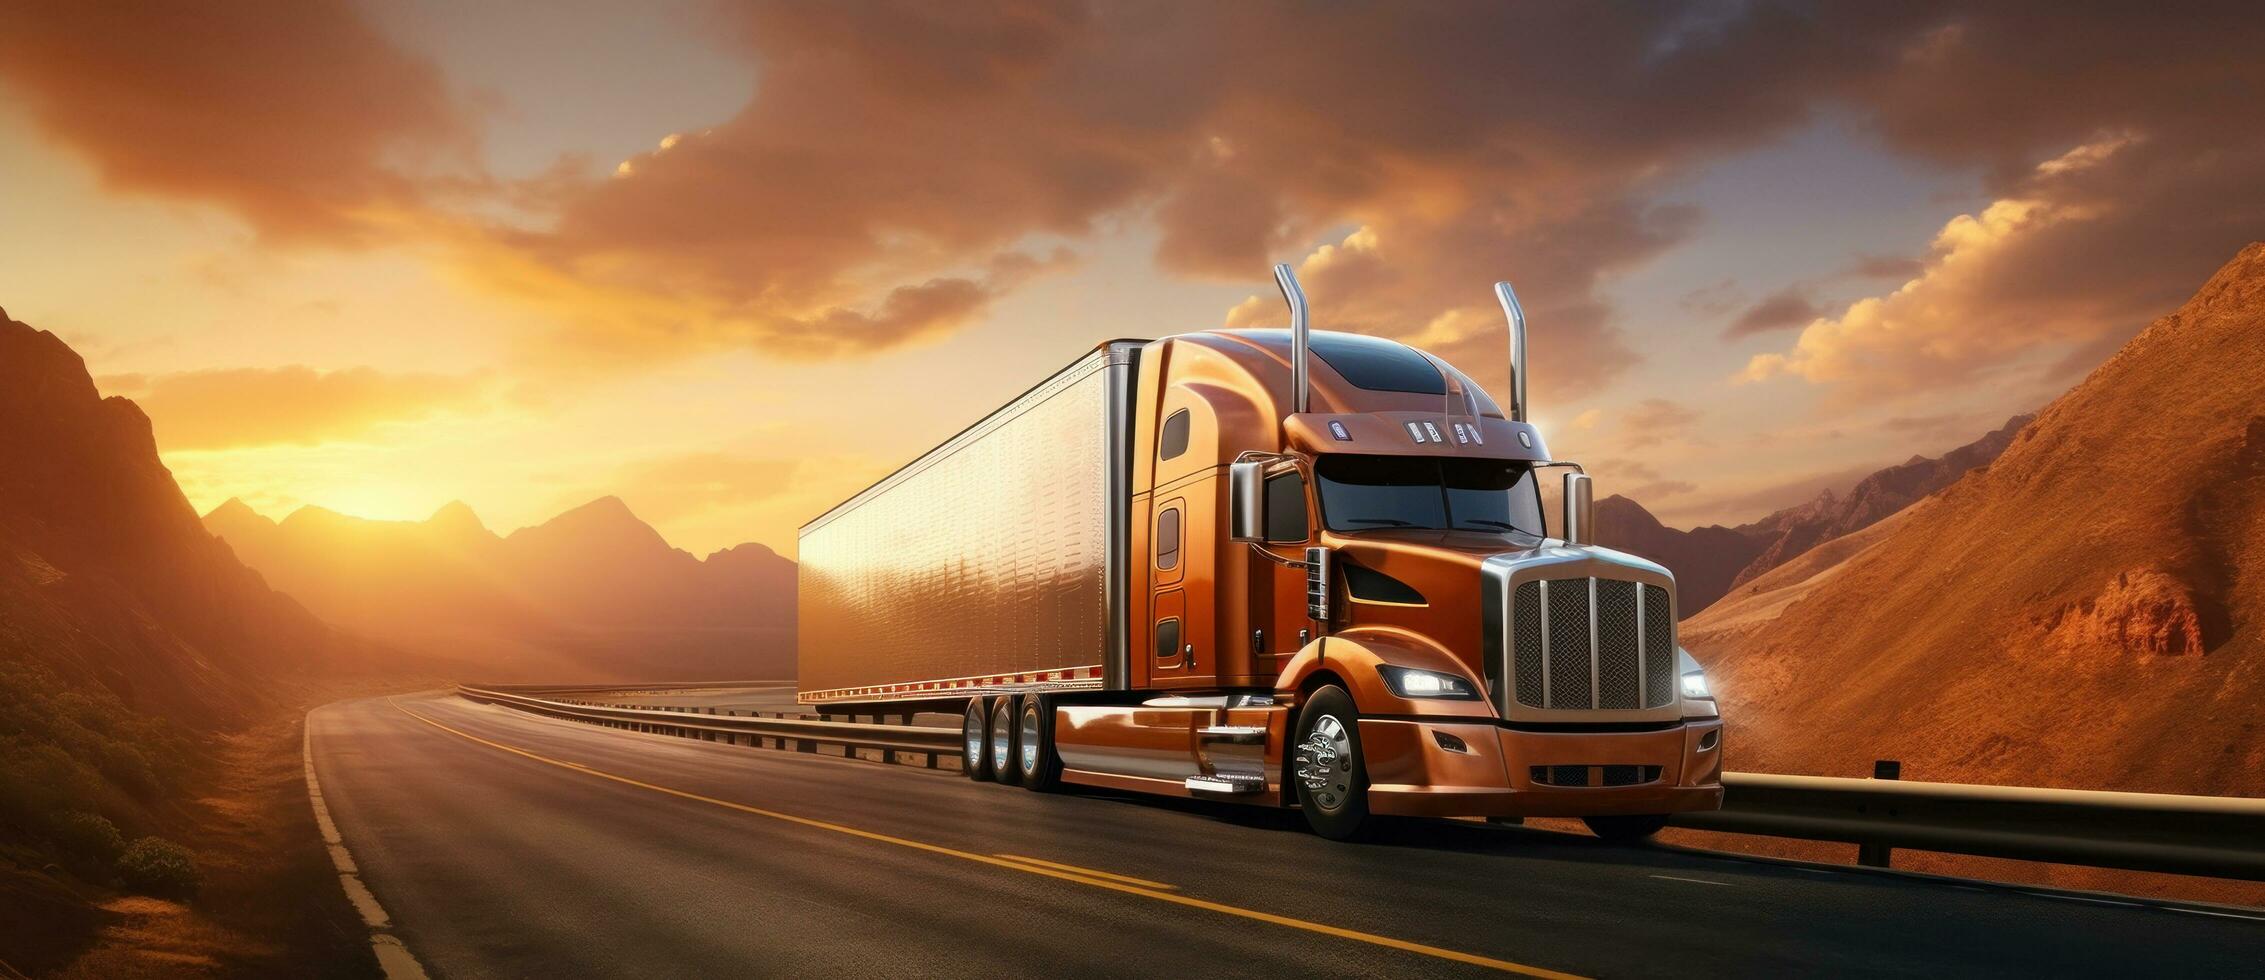 An orange semi truck driving across the road in late evening by sunset photo